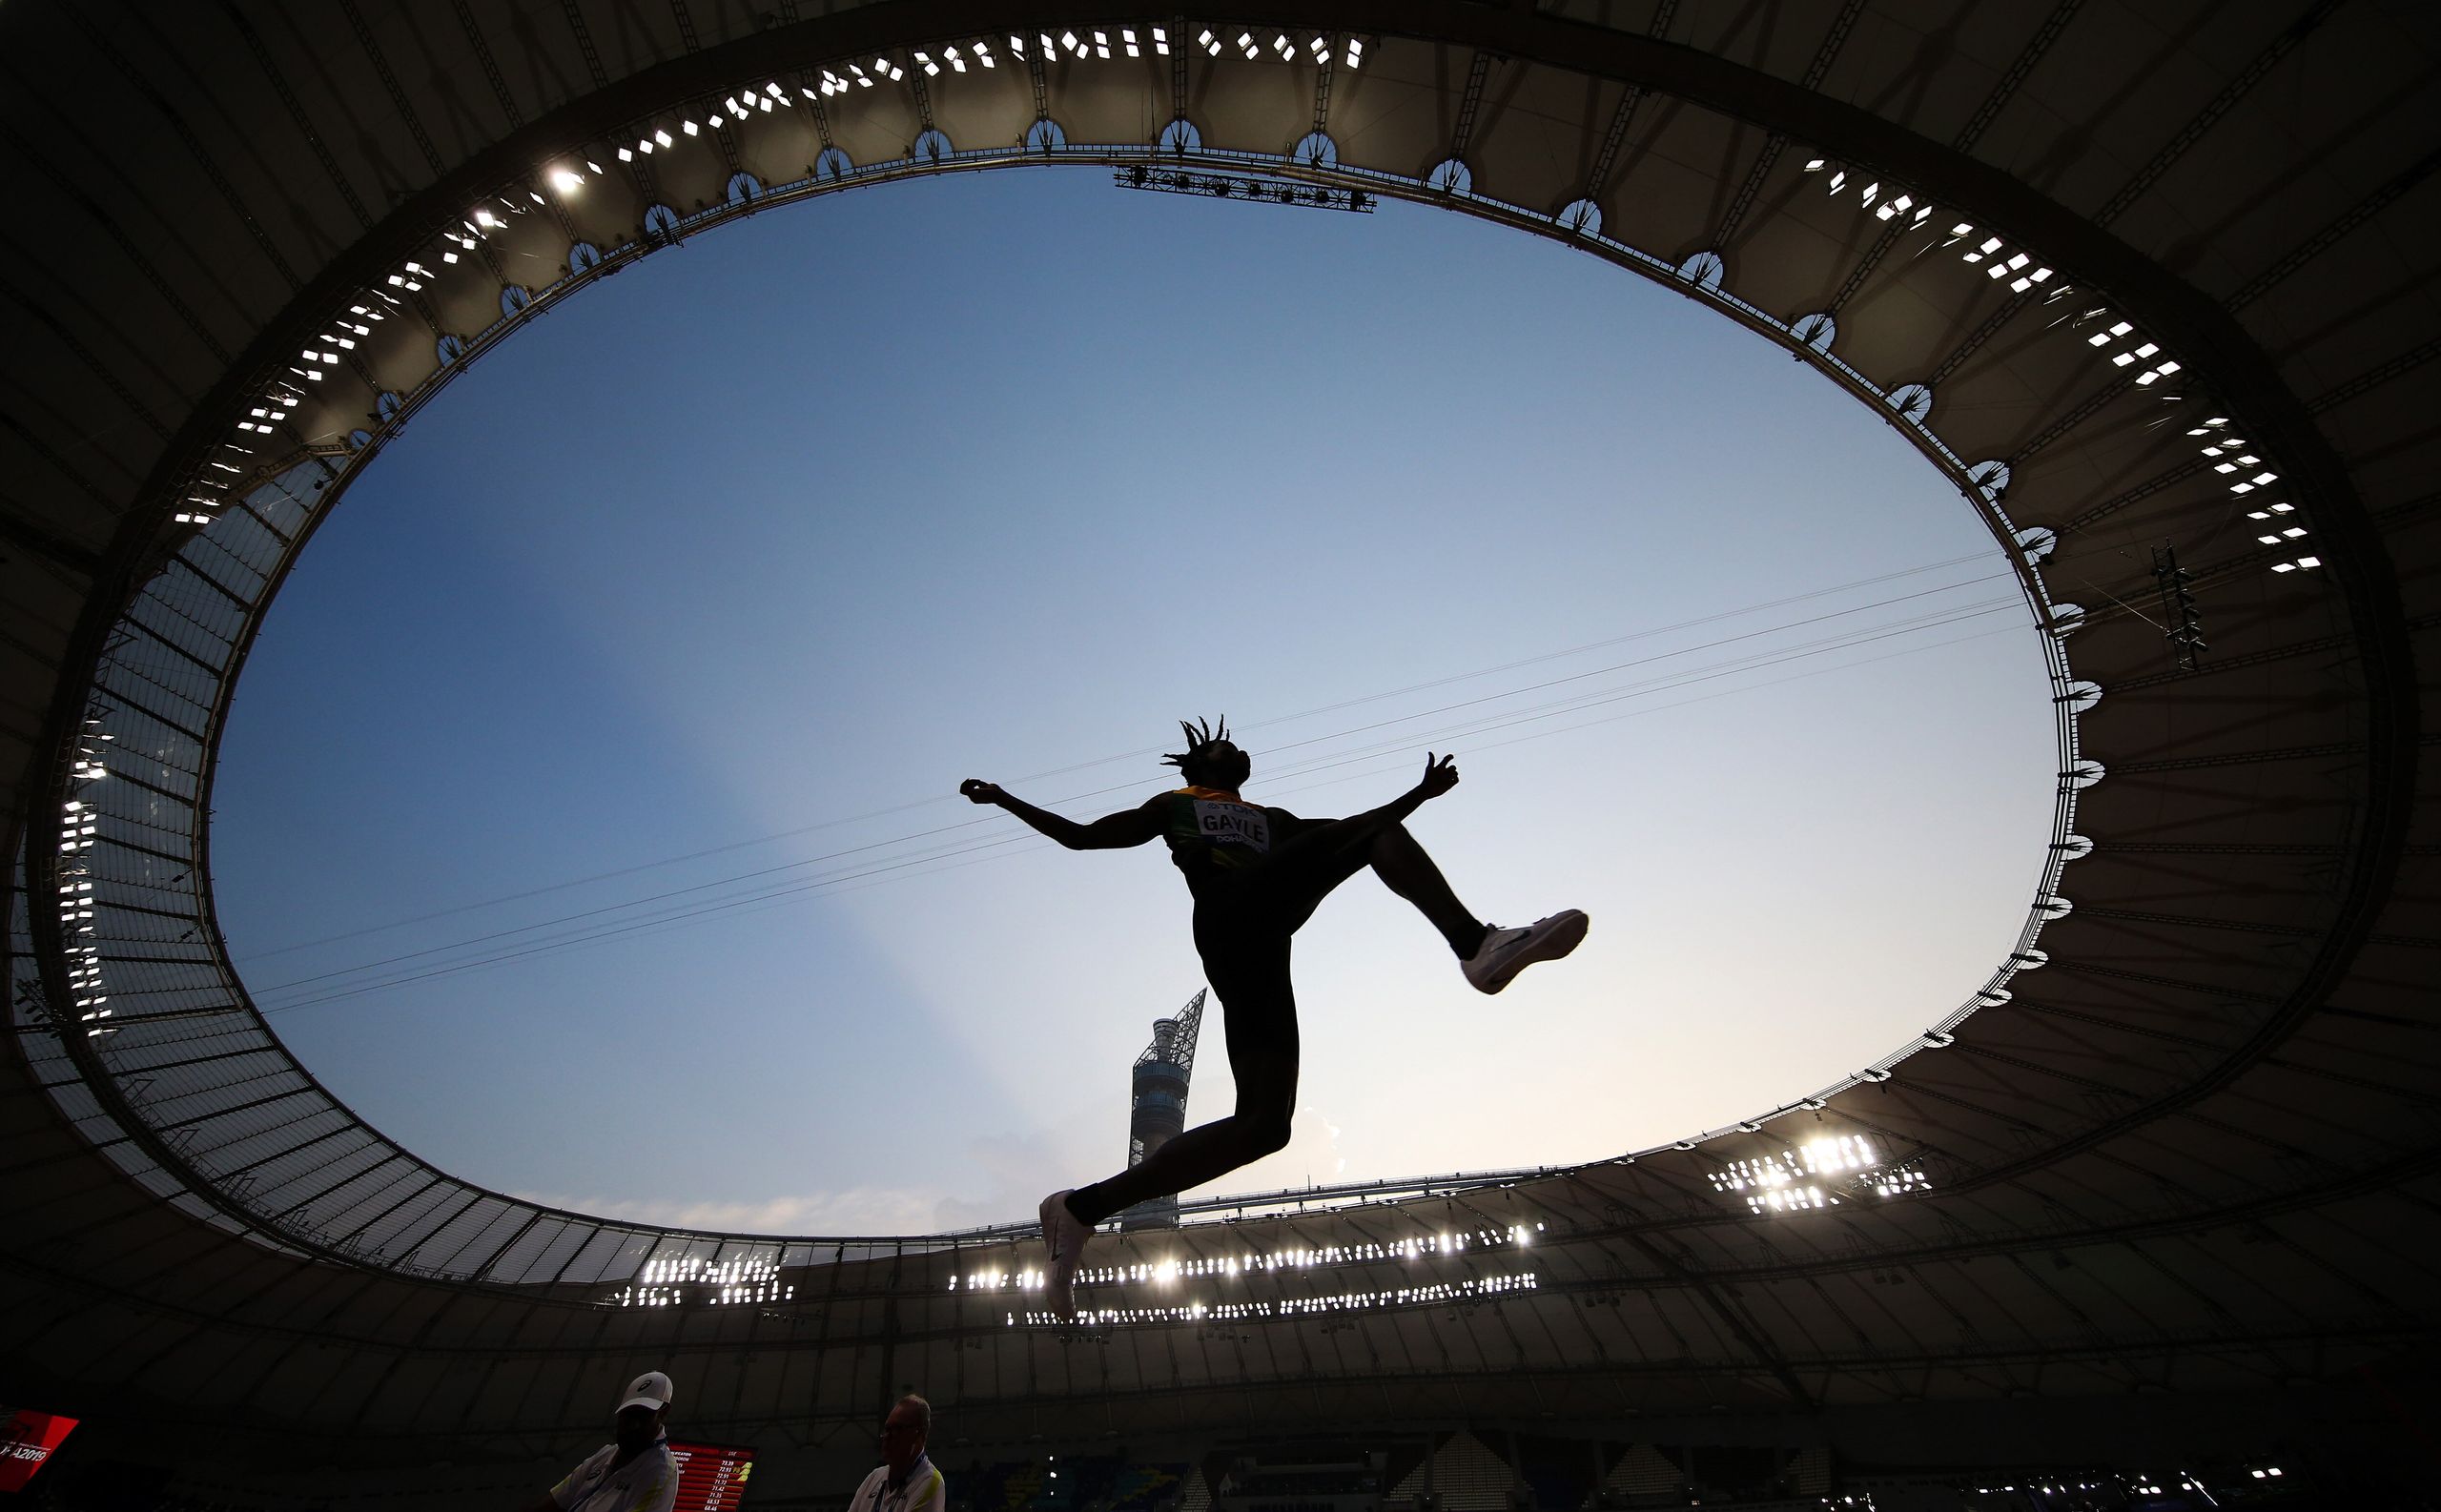 DOHA, QATAR - SEPTEMBER 27: Tajay Gayle of Jamaica competes in the Men's Long Jump qualification during day one of 17th IAAF 